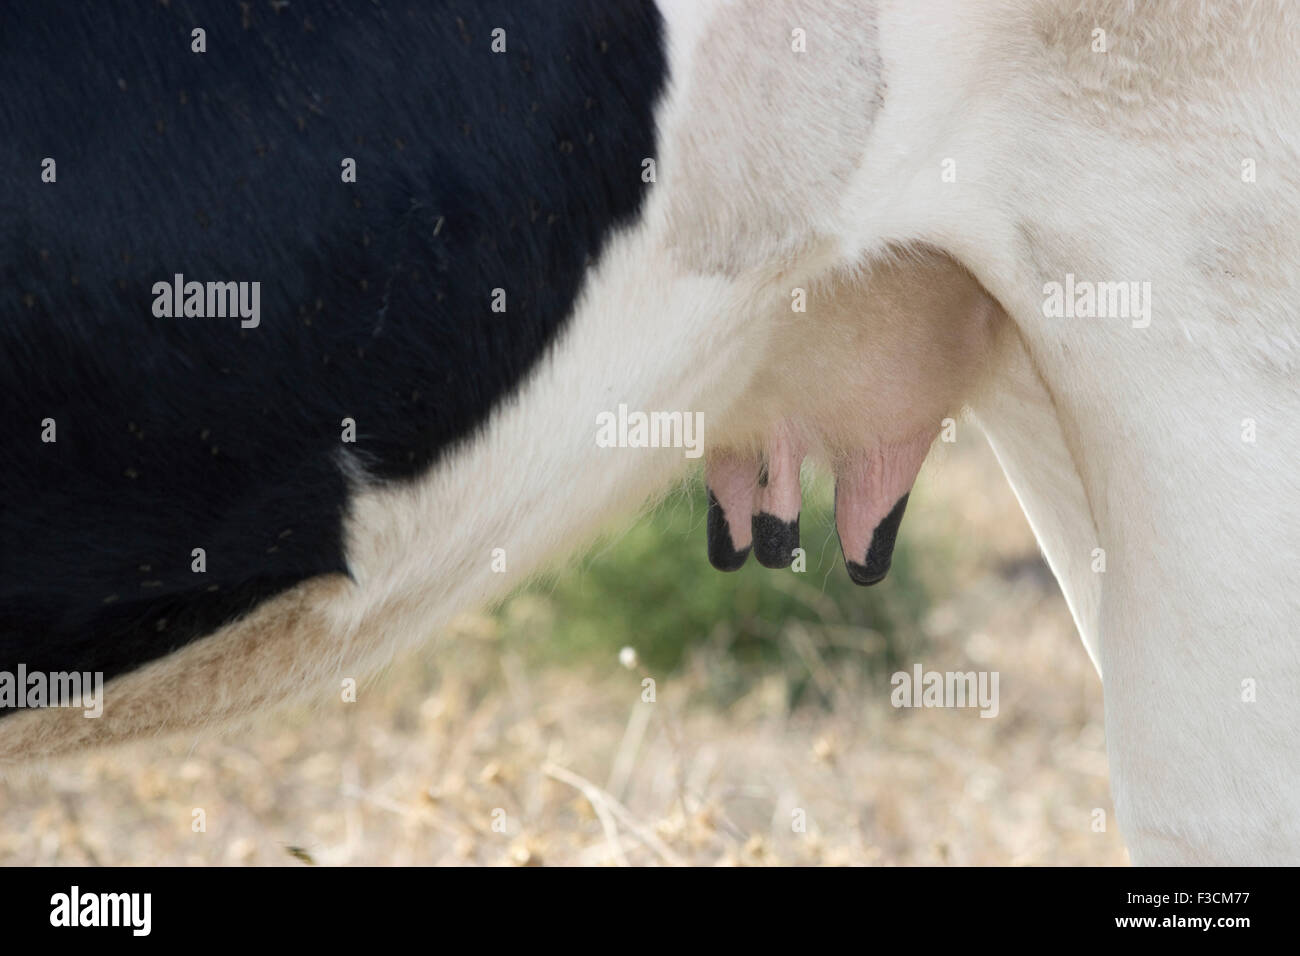 Horizontal shot of a cow's hanging teats/ udders, rear body and legs. Stock Photo